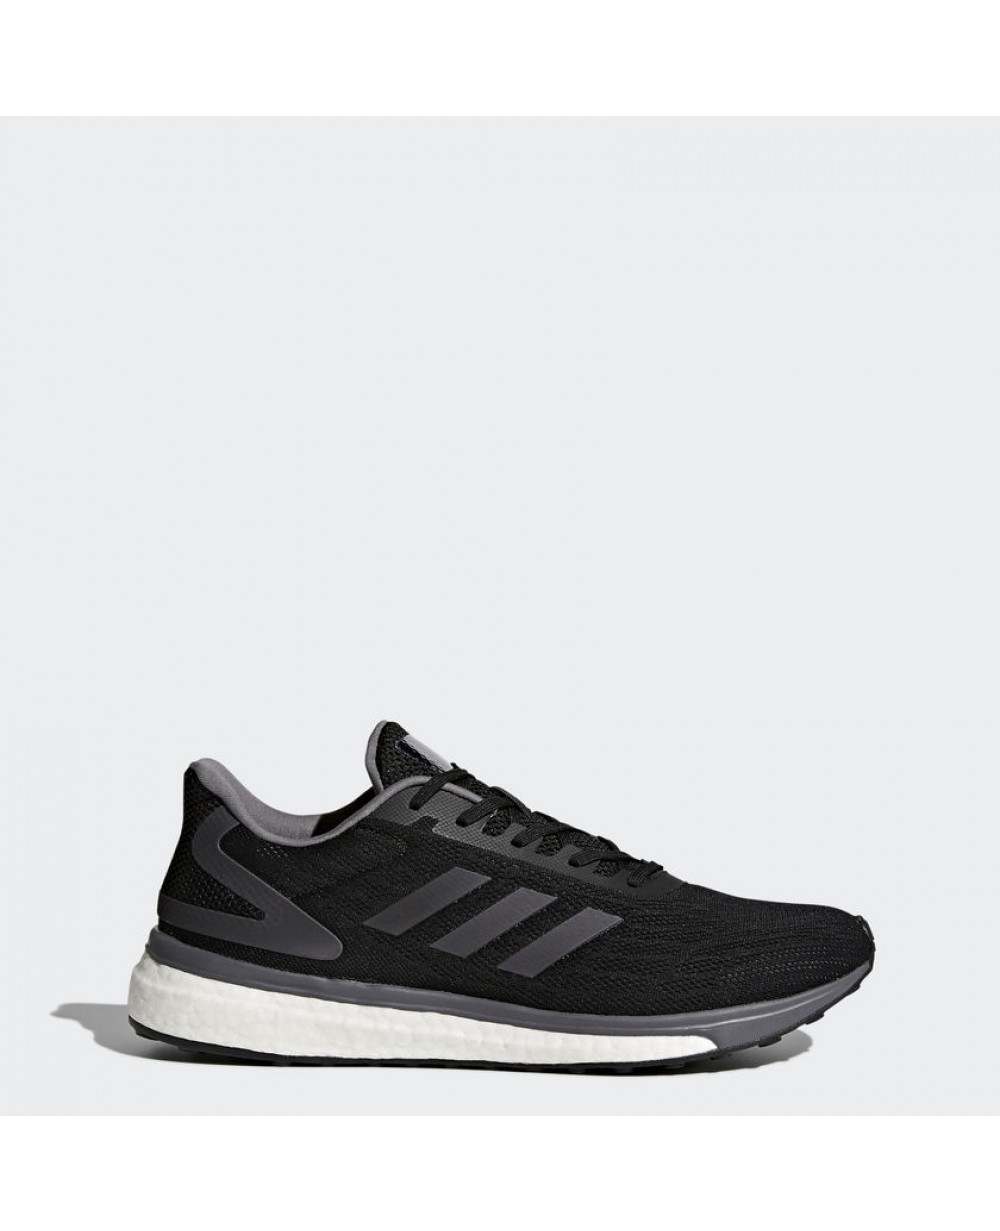 Adidas Response Lite Running Shoes For 